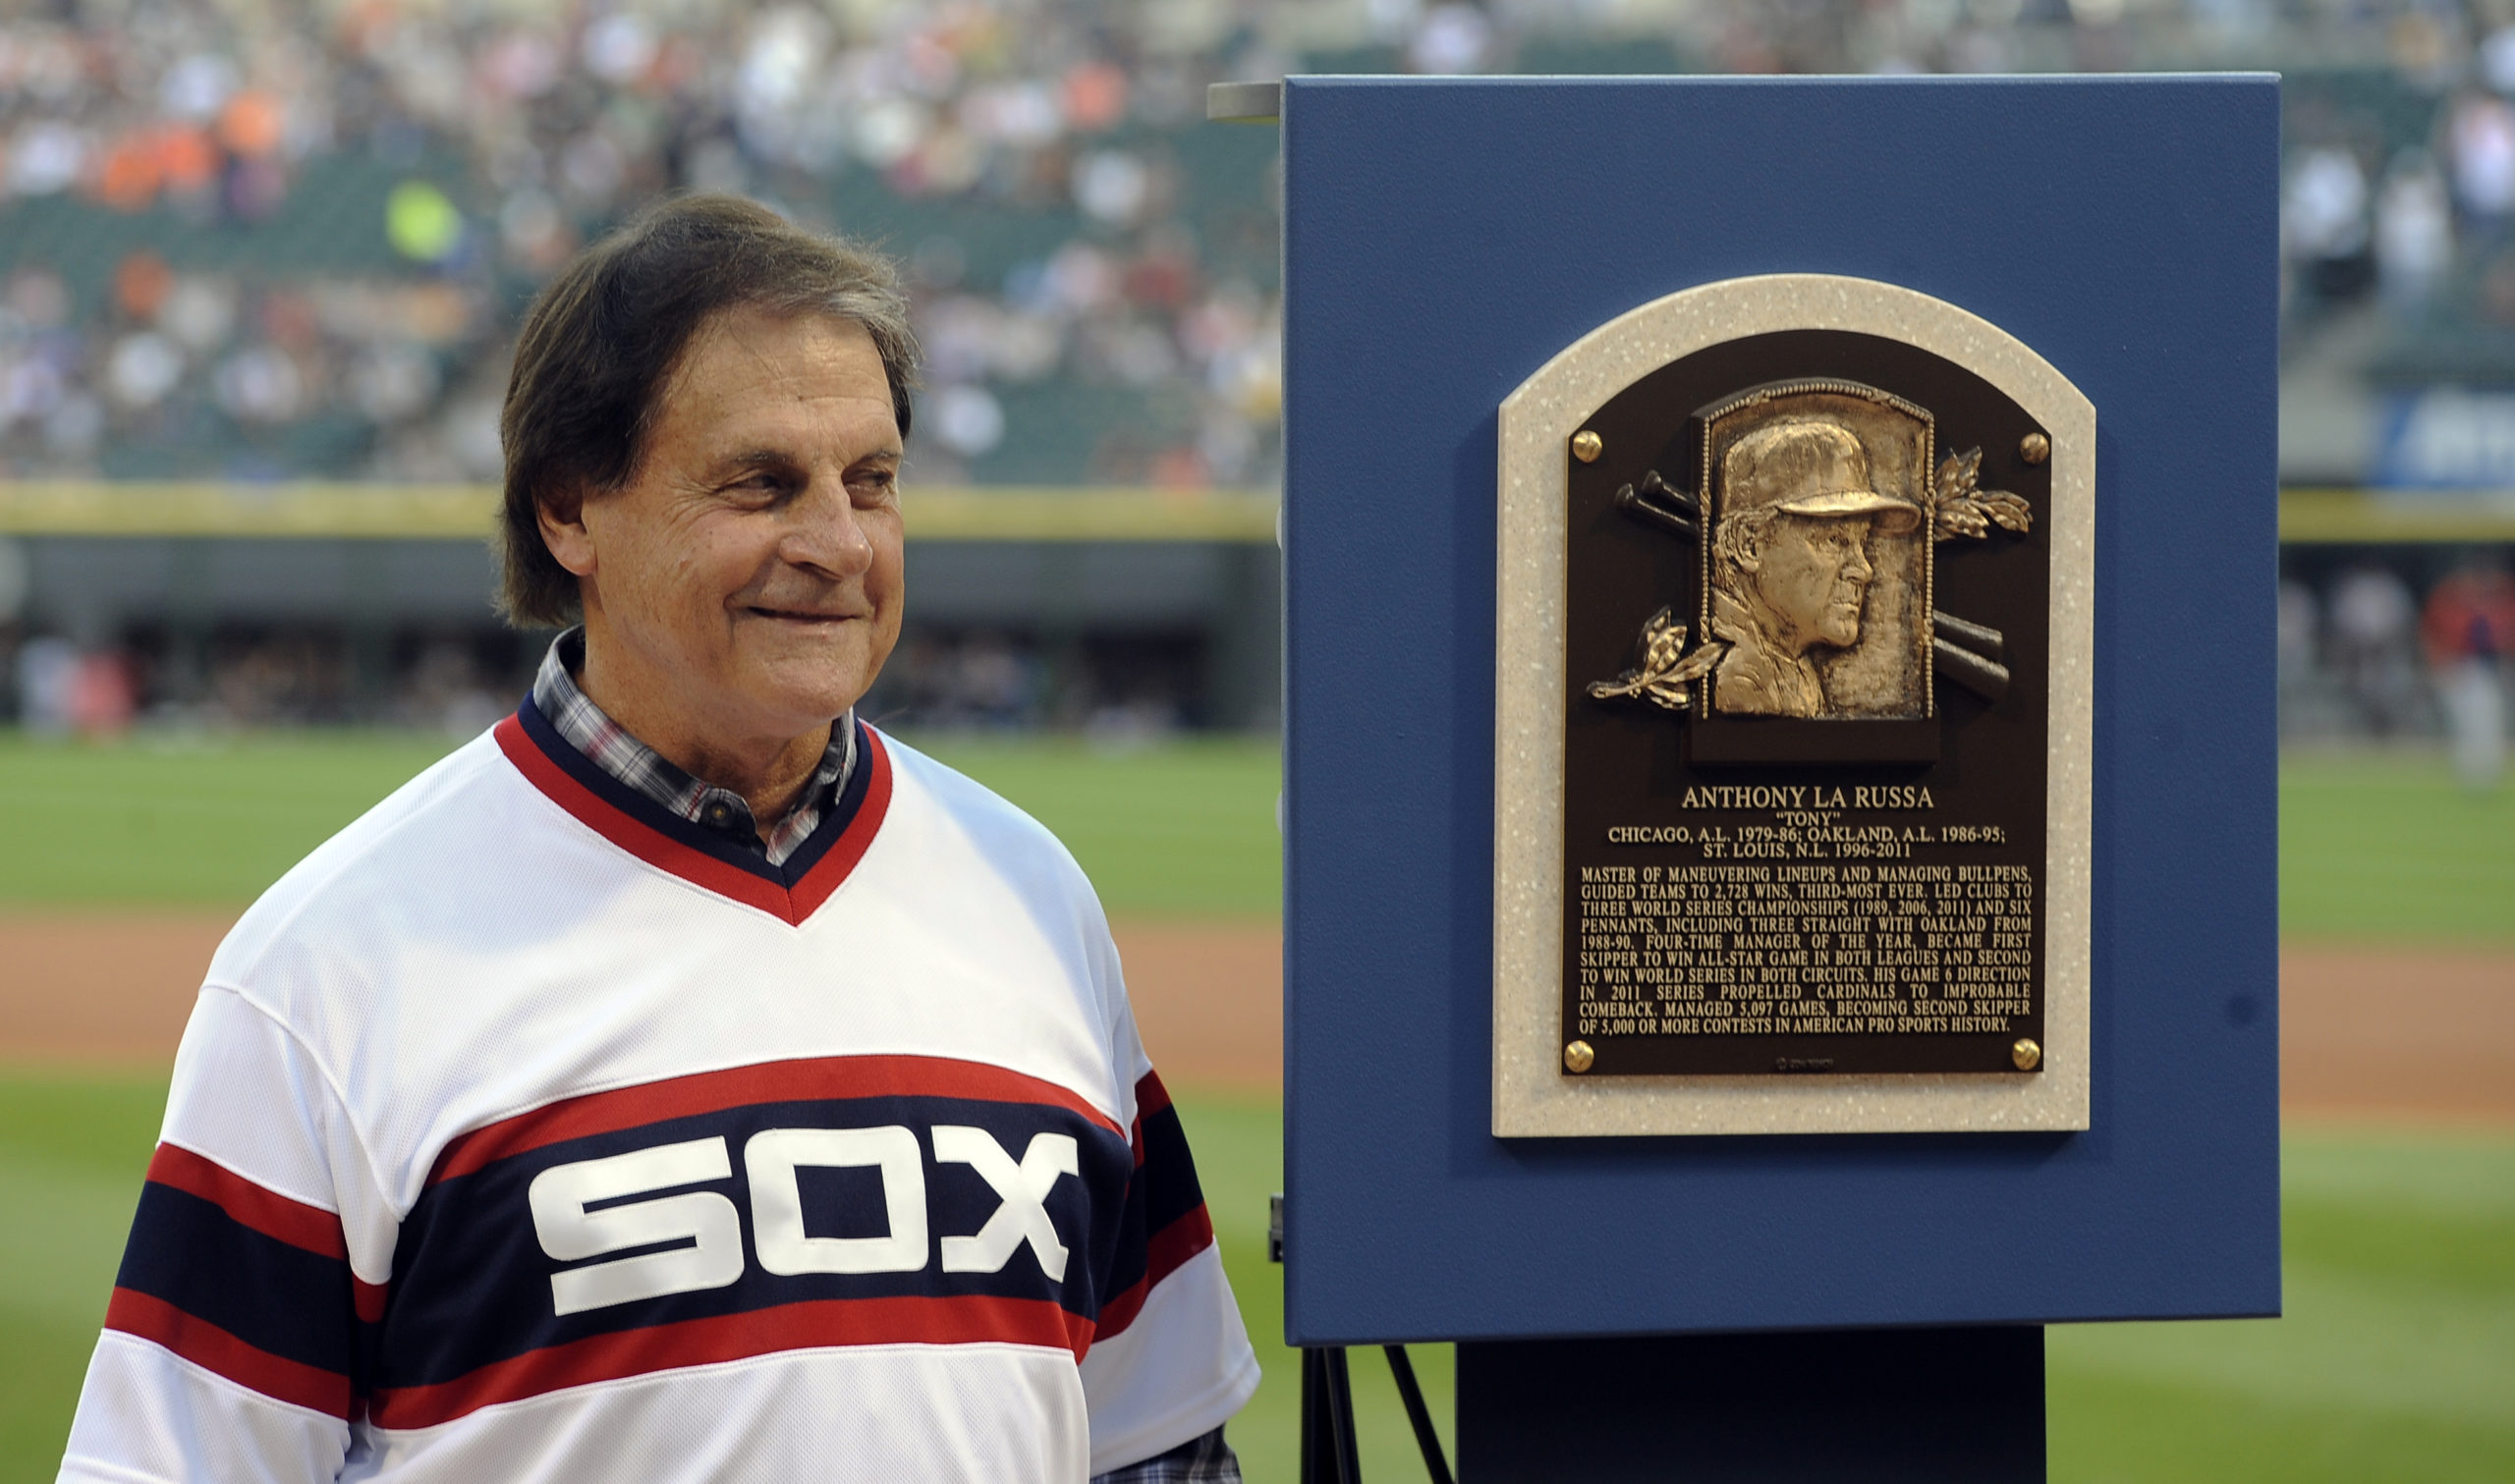 Tony La Russa's Track Record Shows He Is A Bad Fit For The White Sox